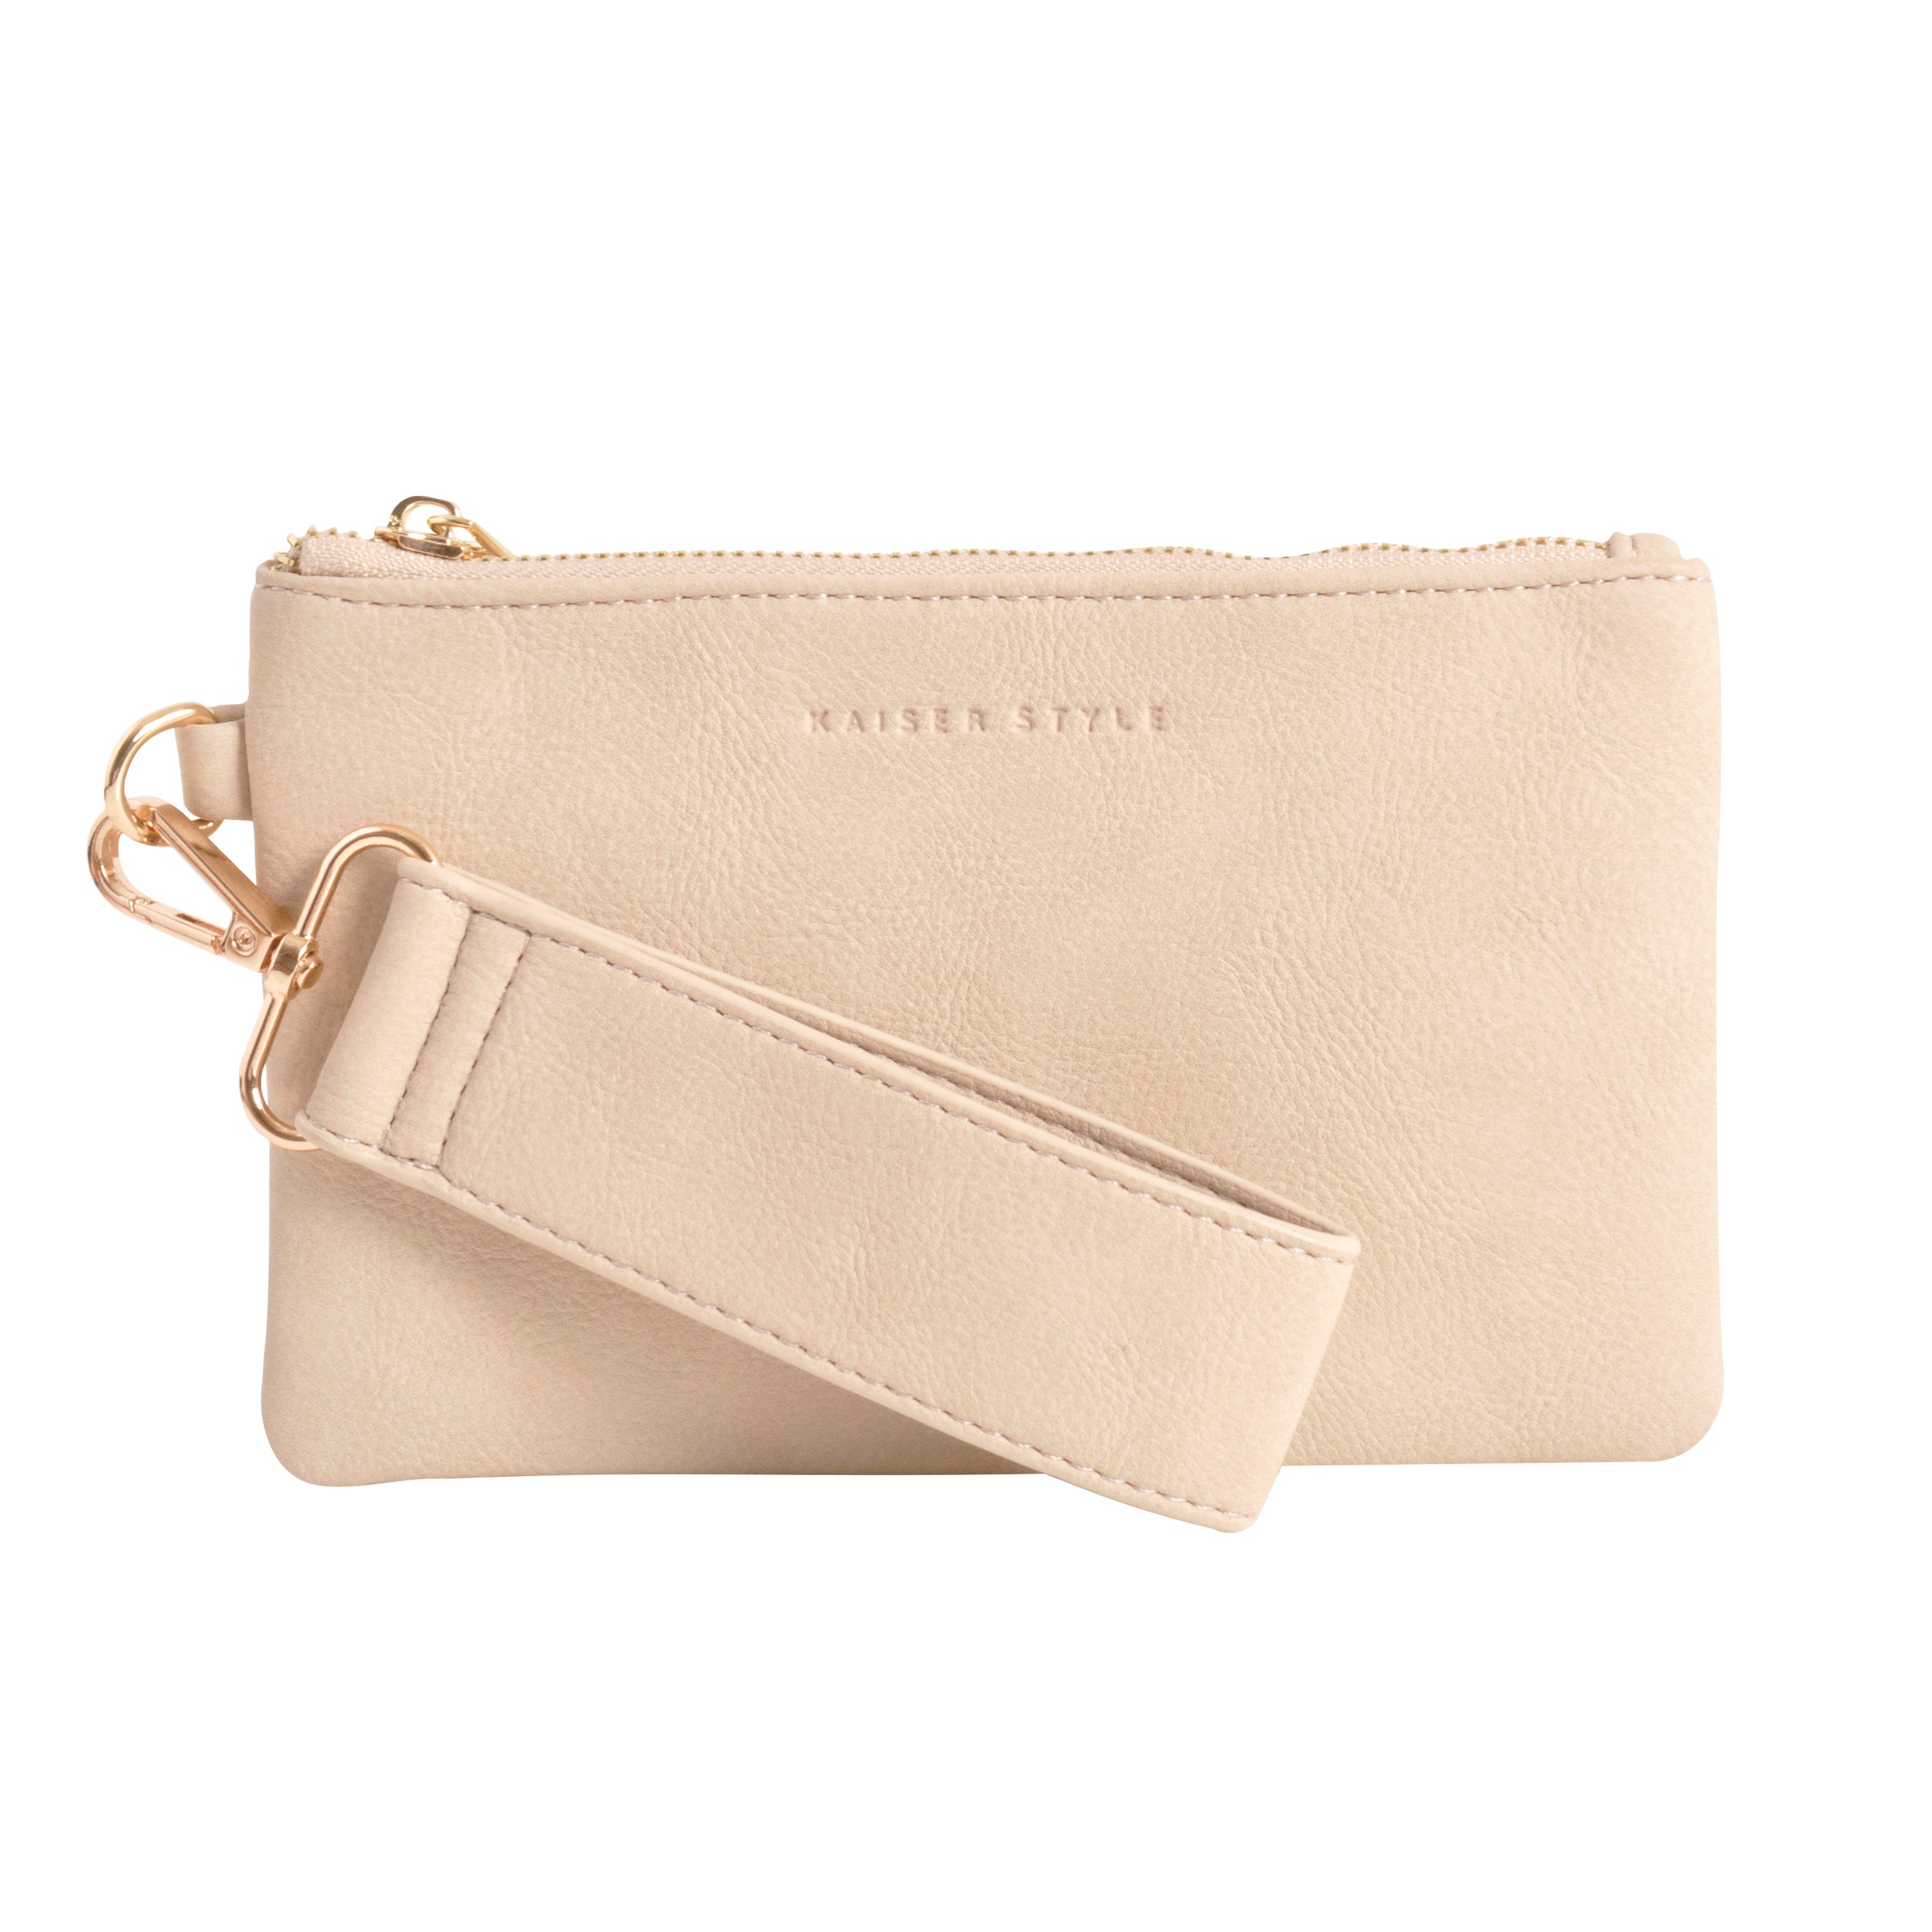 Faux Leather Clutch with Strap - Beige